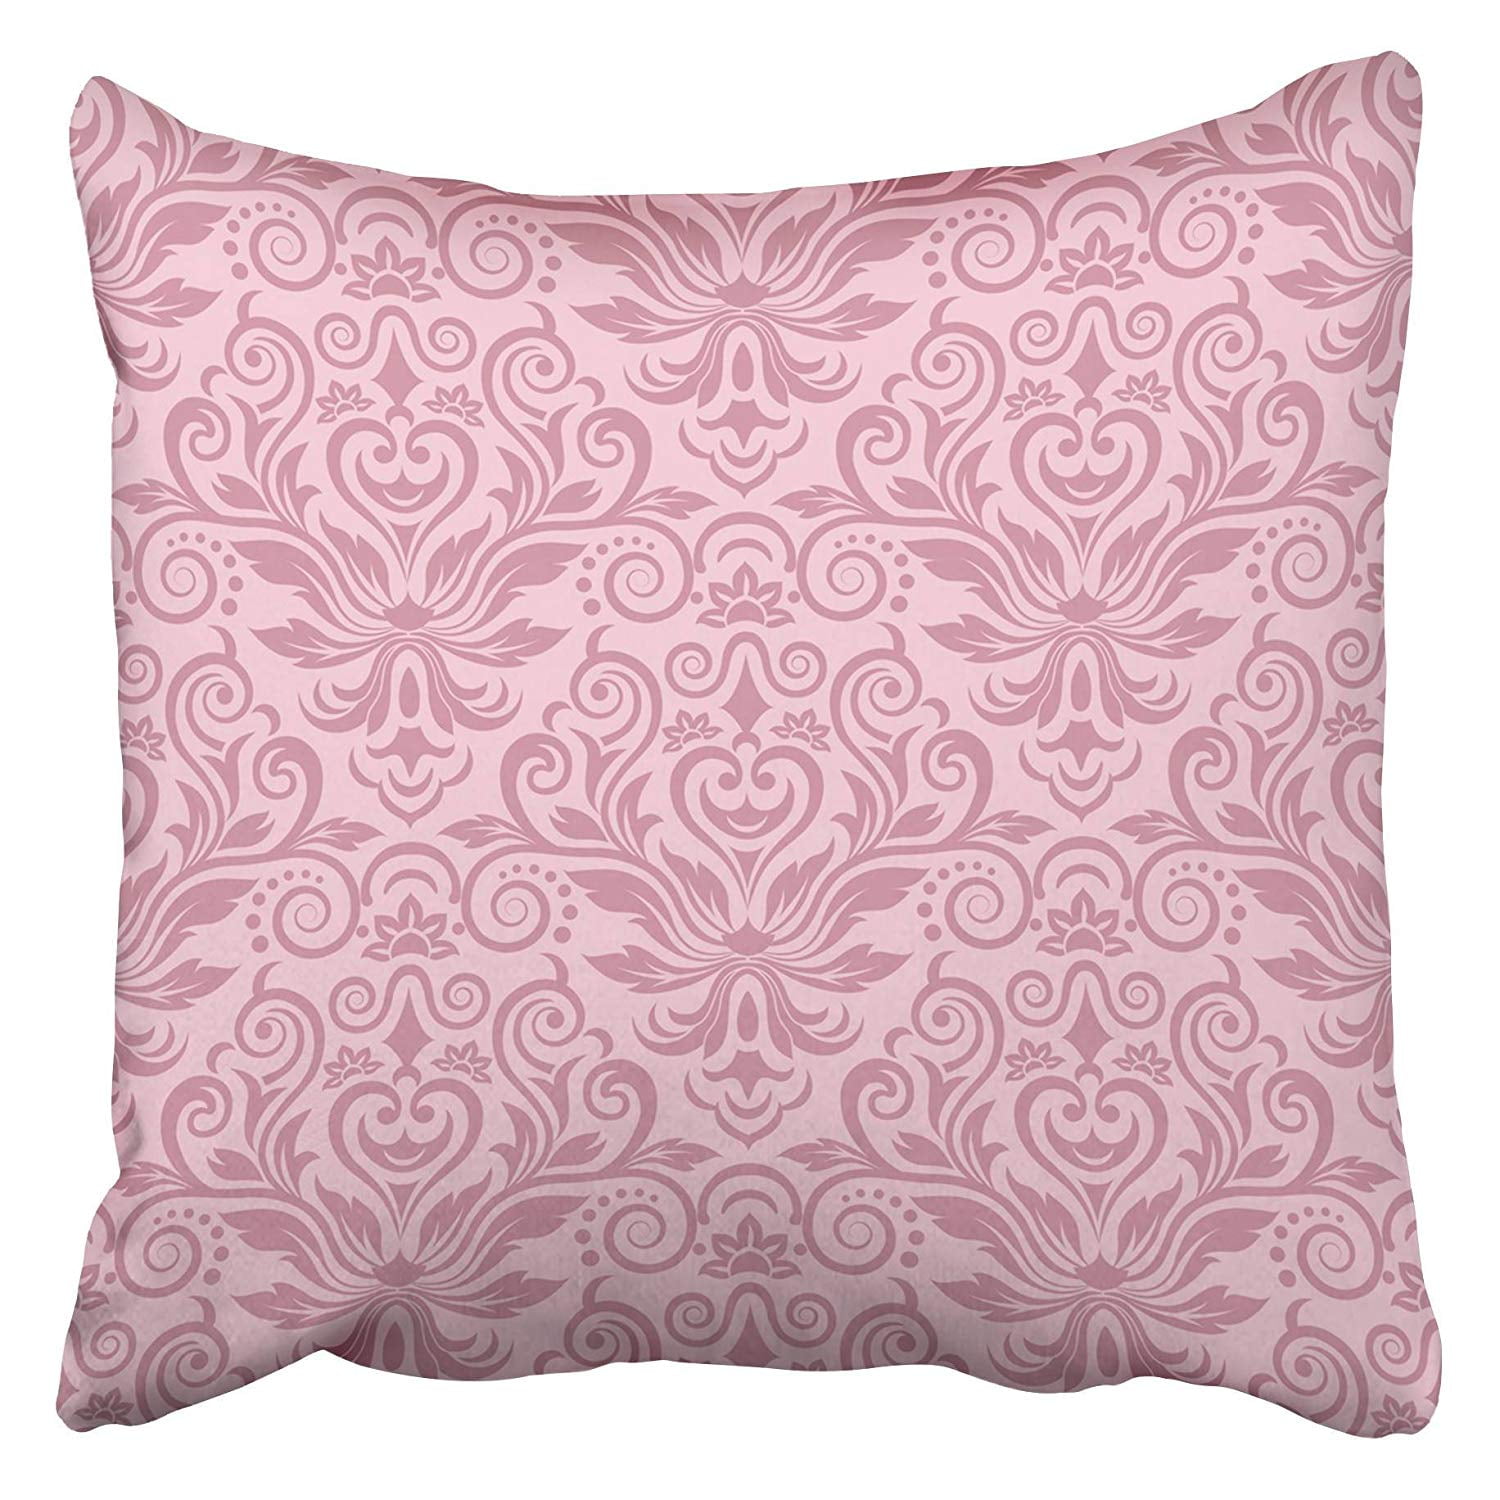 Damask Cushion Cover Gift Designed Throw Pillow Case Cover Cushion 18 x 18 Inch